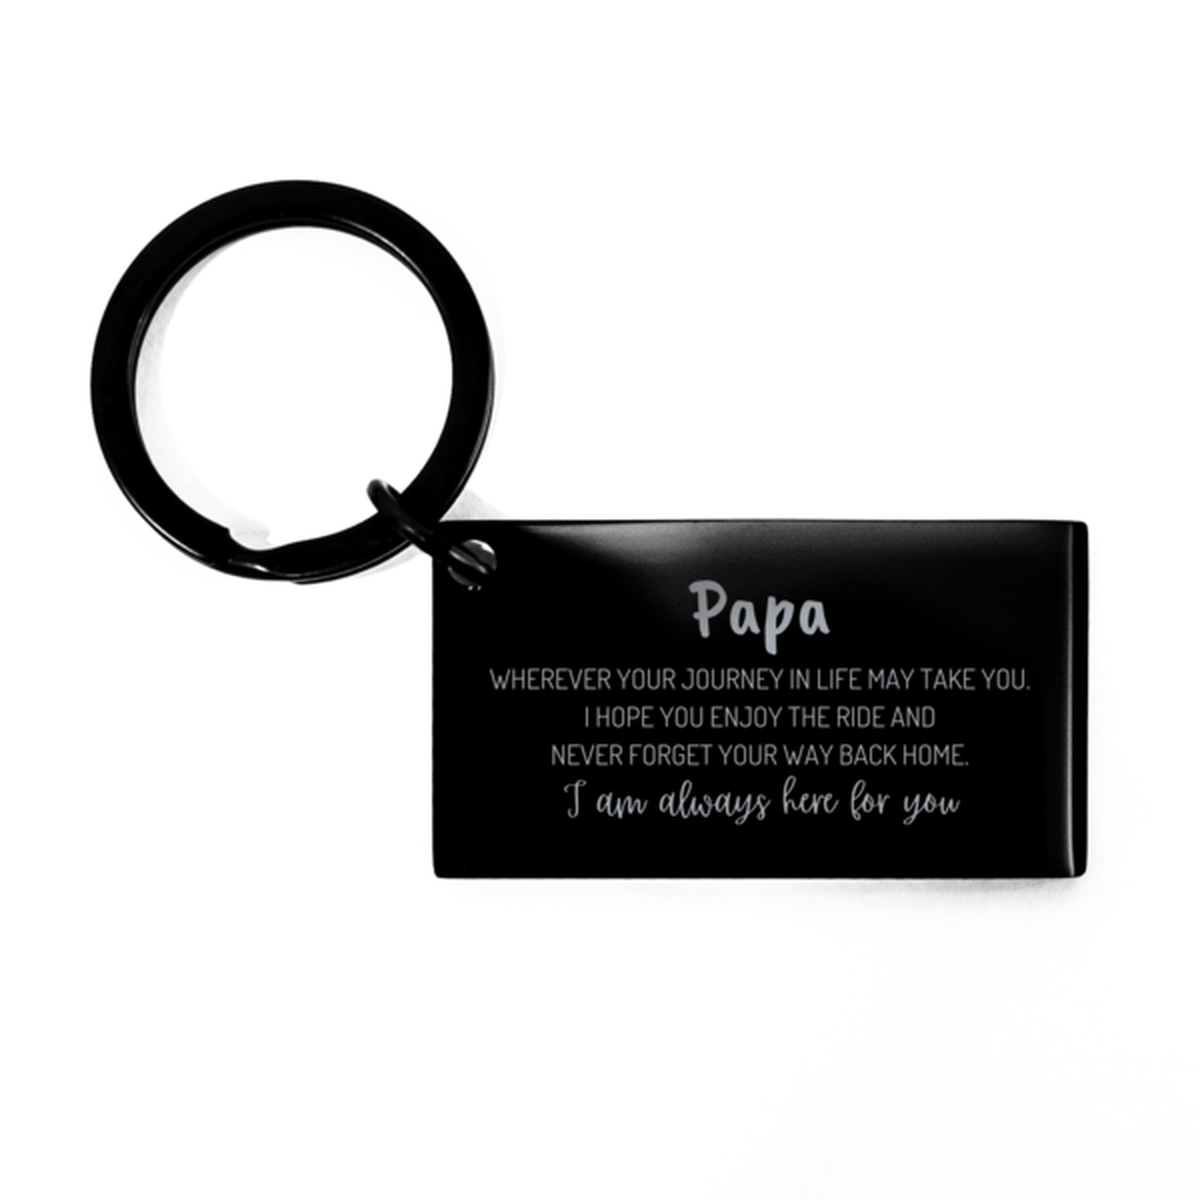 Papa wherever your journey in life may take you, I am always here for you Papa Keychain, Awesome Christmas Gifts For Papa, Papa Birthday Gifts for Men Women Family Loved One